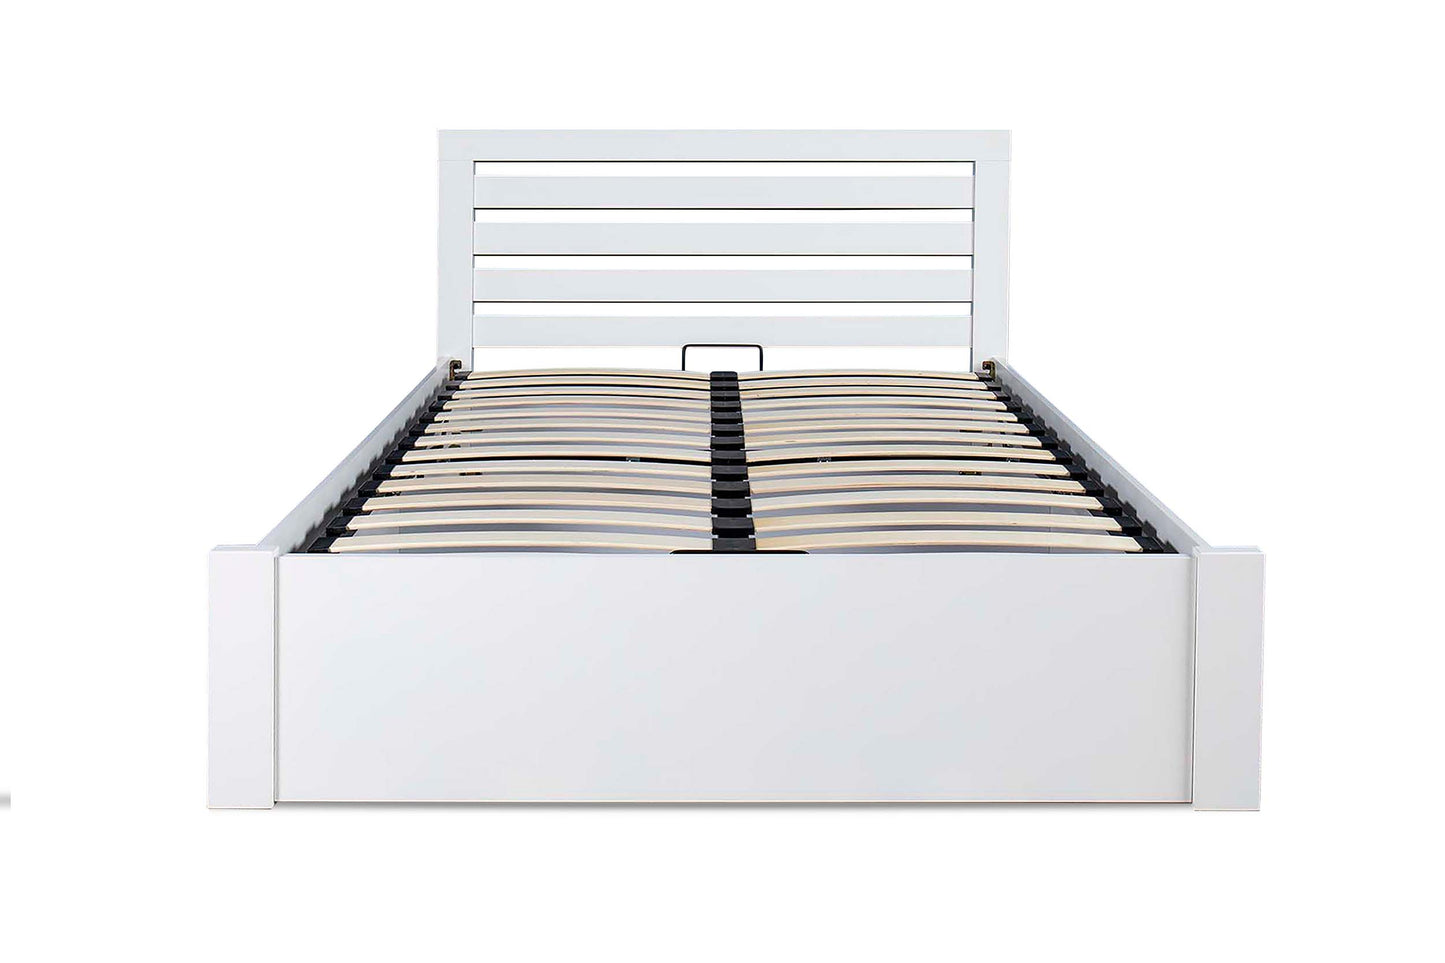 Wingfield Ottoman Storage Bed Frame - 5ft King Size - Bright White